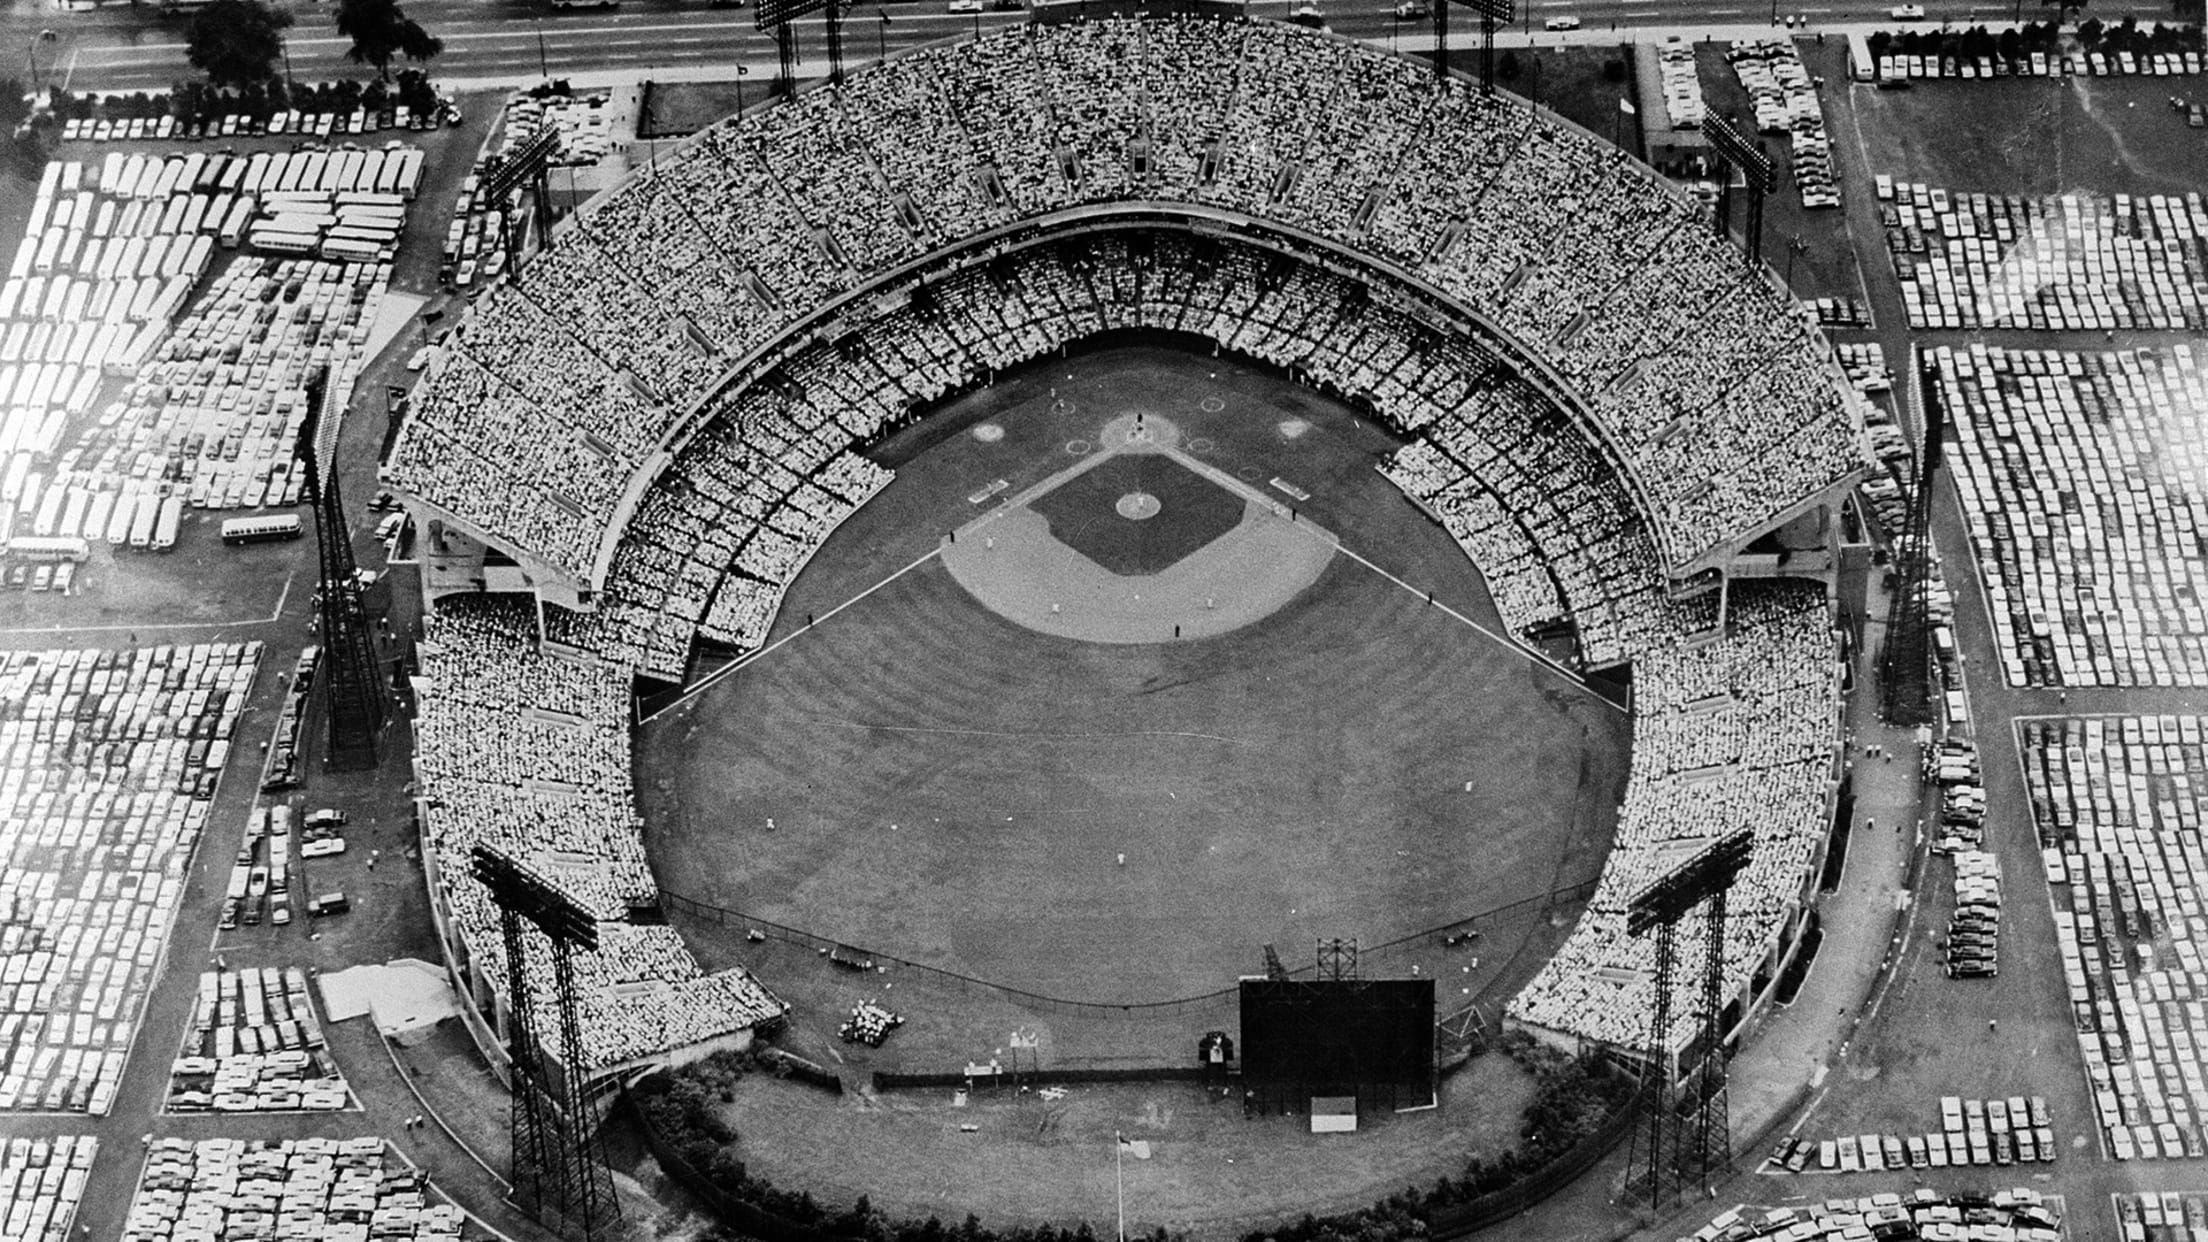 Memorial Stadium in Baltimore, Maryland was completed in 1954 at